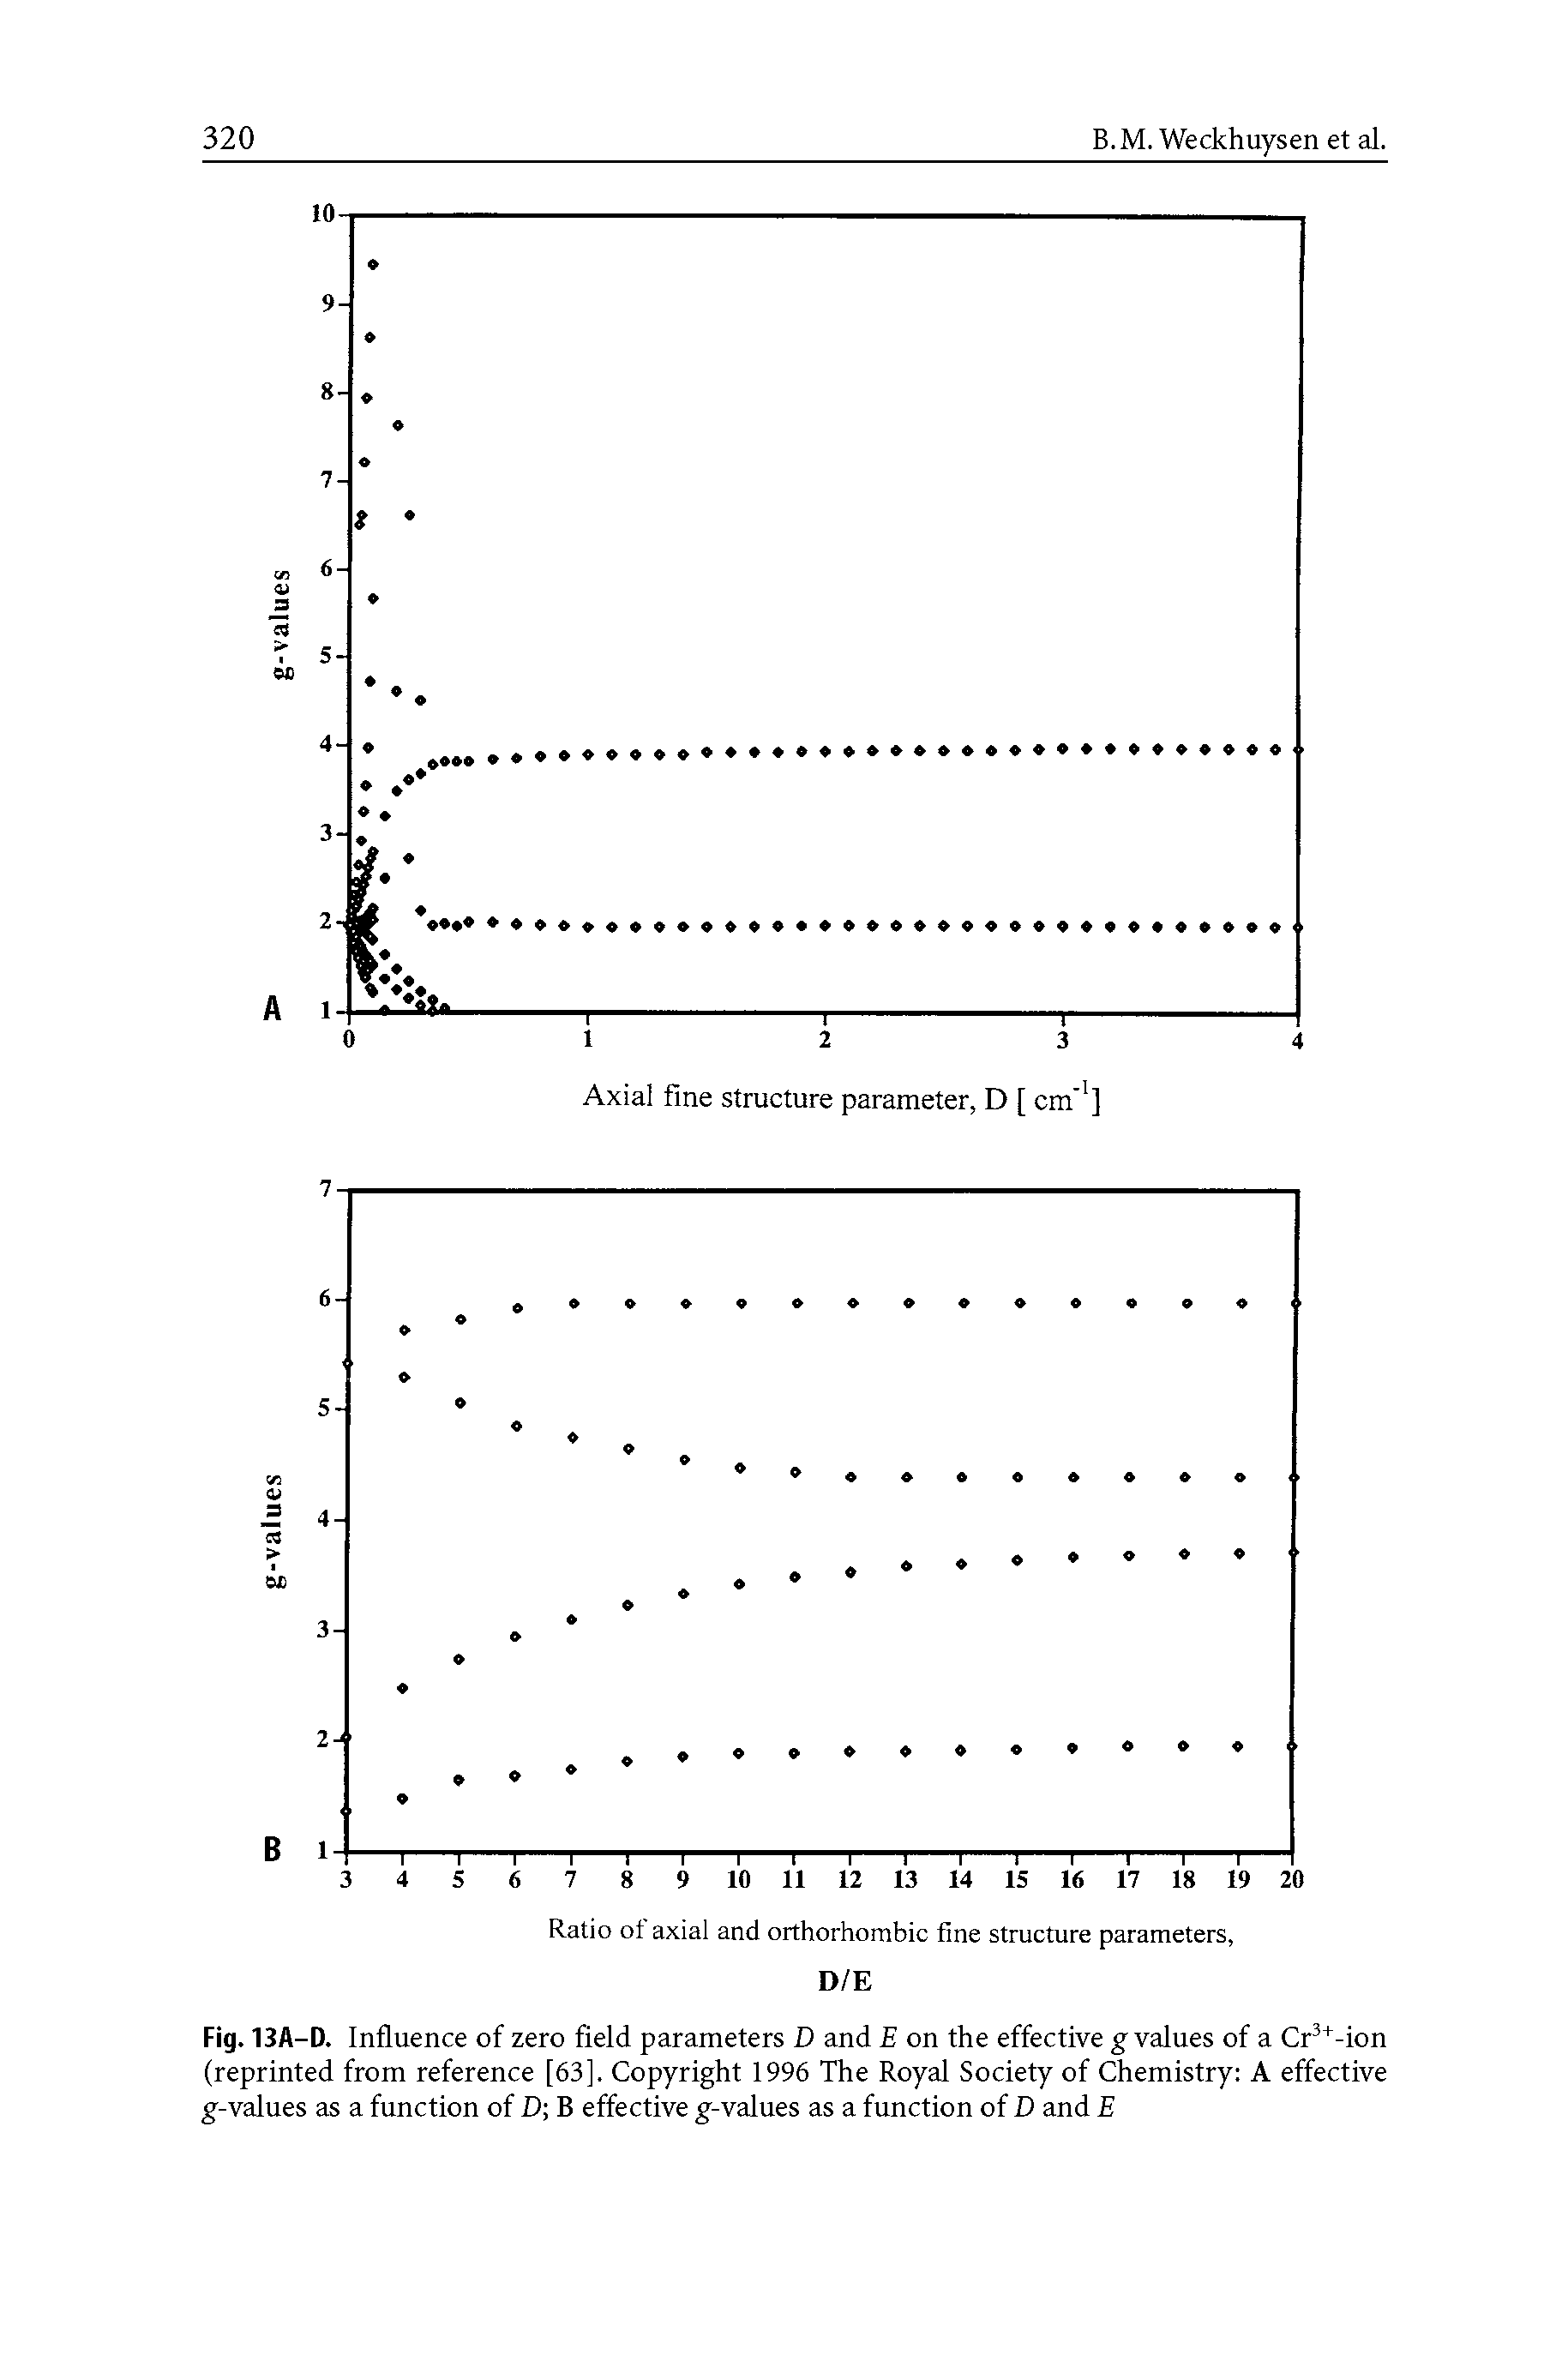 Fig. 13A-D. Influence of zero field parameters D and E on the effective g values of a Cr +-ion (reprinted from reference [63], Copyright 1996 The Royal Society of Chemistry A effective g-values as a function of D B effective g-values as a function of D and E...